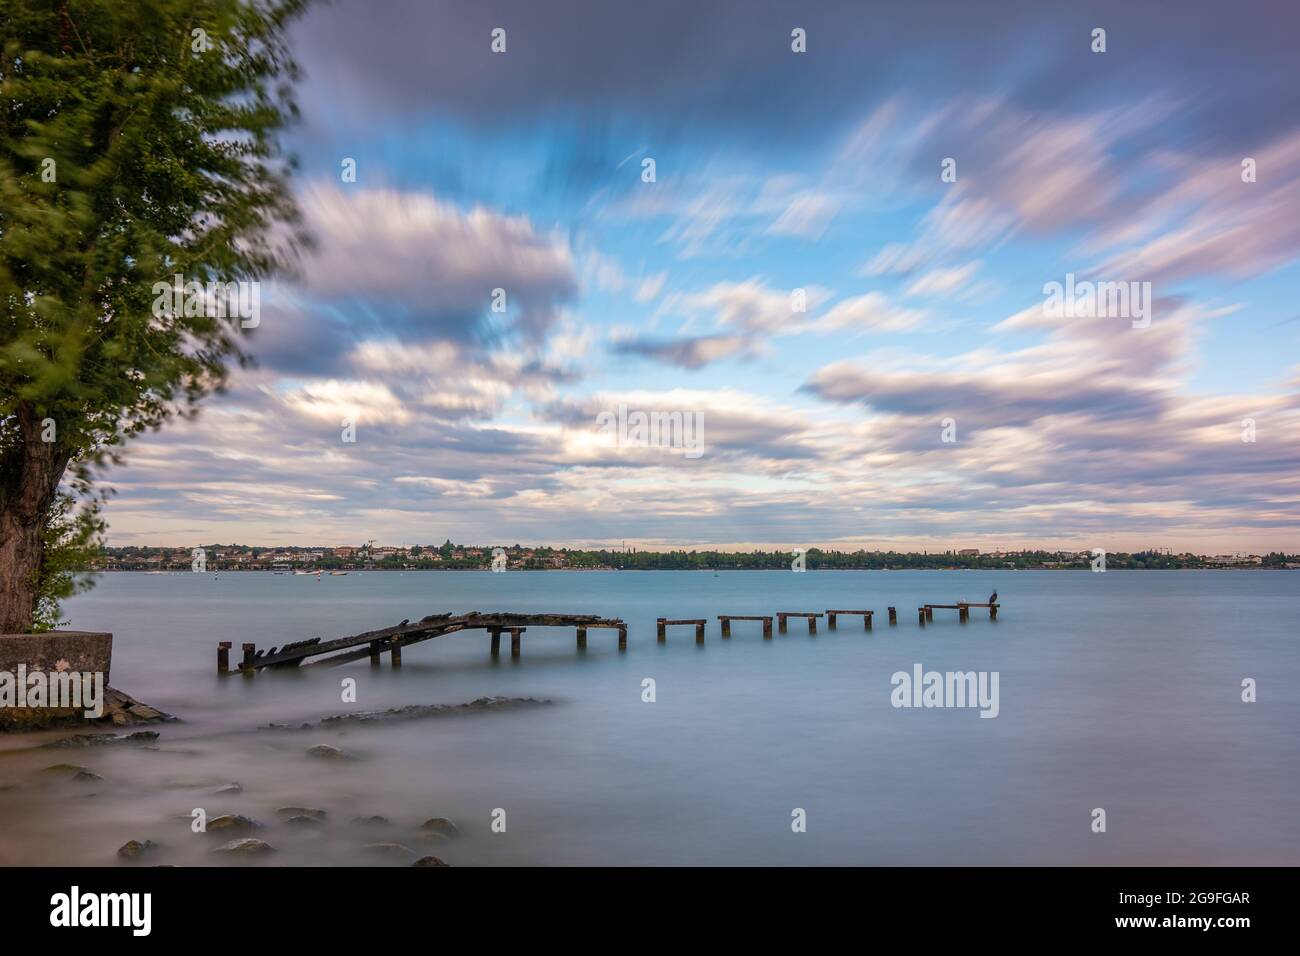 Abandoned wooden pier in lake during sunrise, long exposure Stock Photo